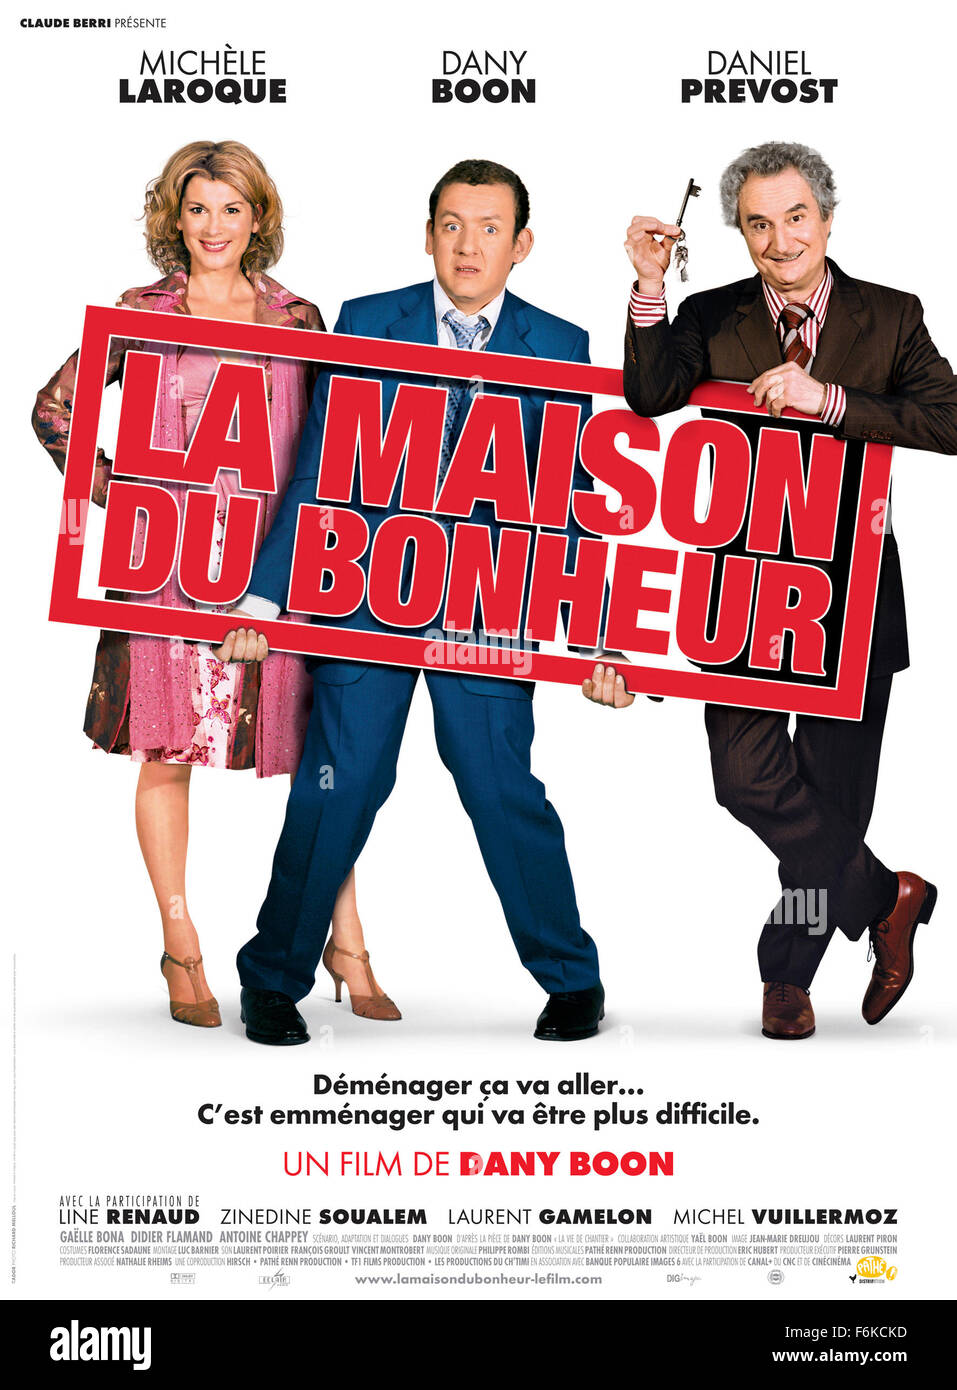 RELEASE DATE: June 07, 2006. MOVIE TITLE: La Maison Du Bonheur. STUDIO: Pathe Renn Productions. PLOT: On a mission to loosen up, a miser's sets about buying a house in the country for his family. PICTURED: MICHELE LAROQUE as Anne Boulin, DANY BOON as Charles Boulin, DANIEL PREVOST as Jean-Pierre Draquart, Movie Poster. Stock Photo